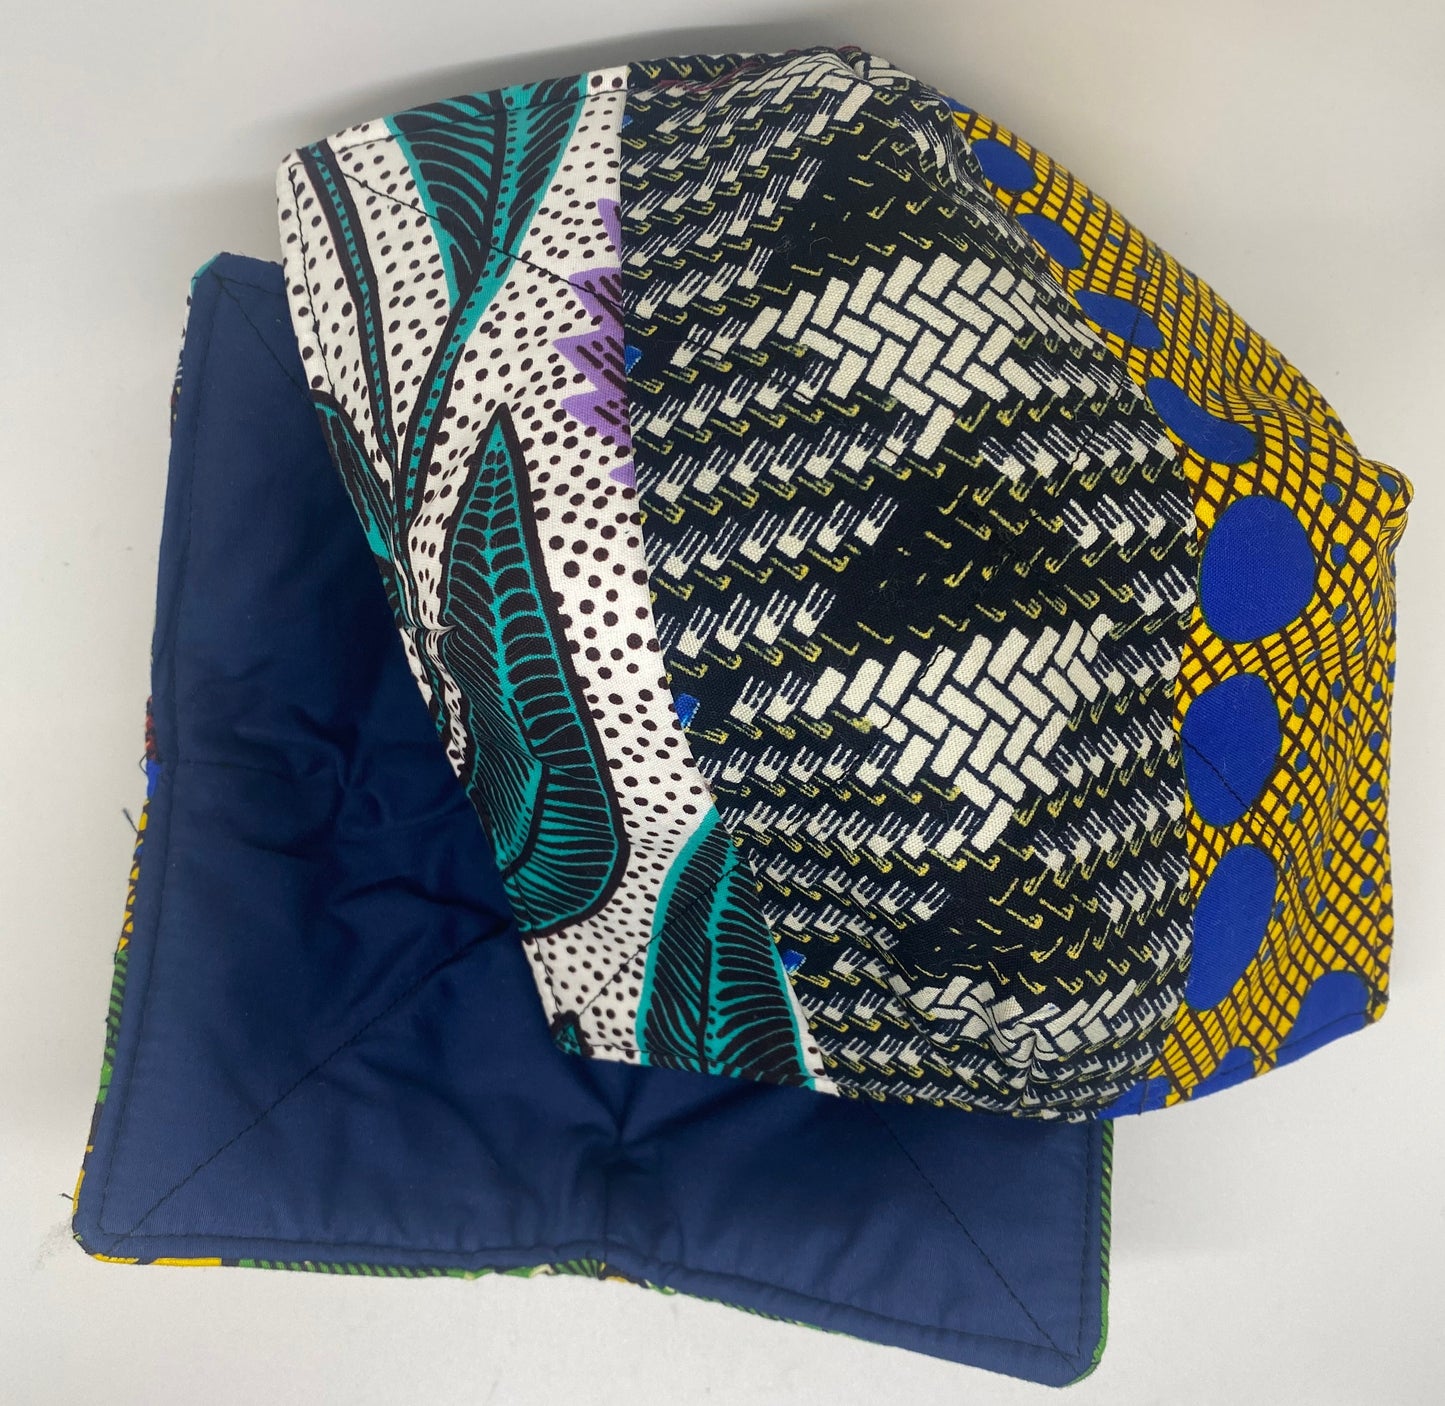 Quilted Patchwork African Print Microwave Koozie